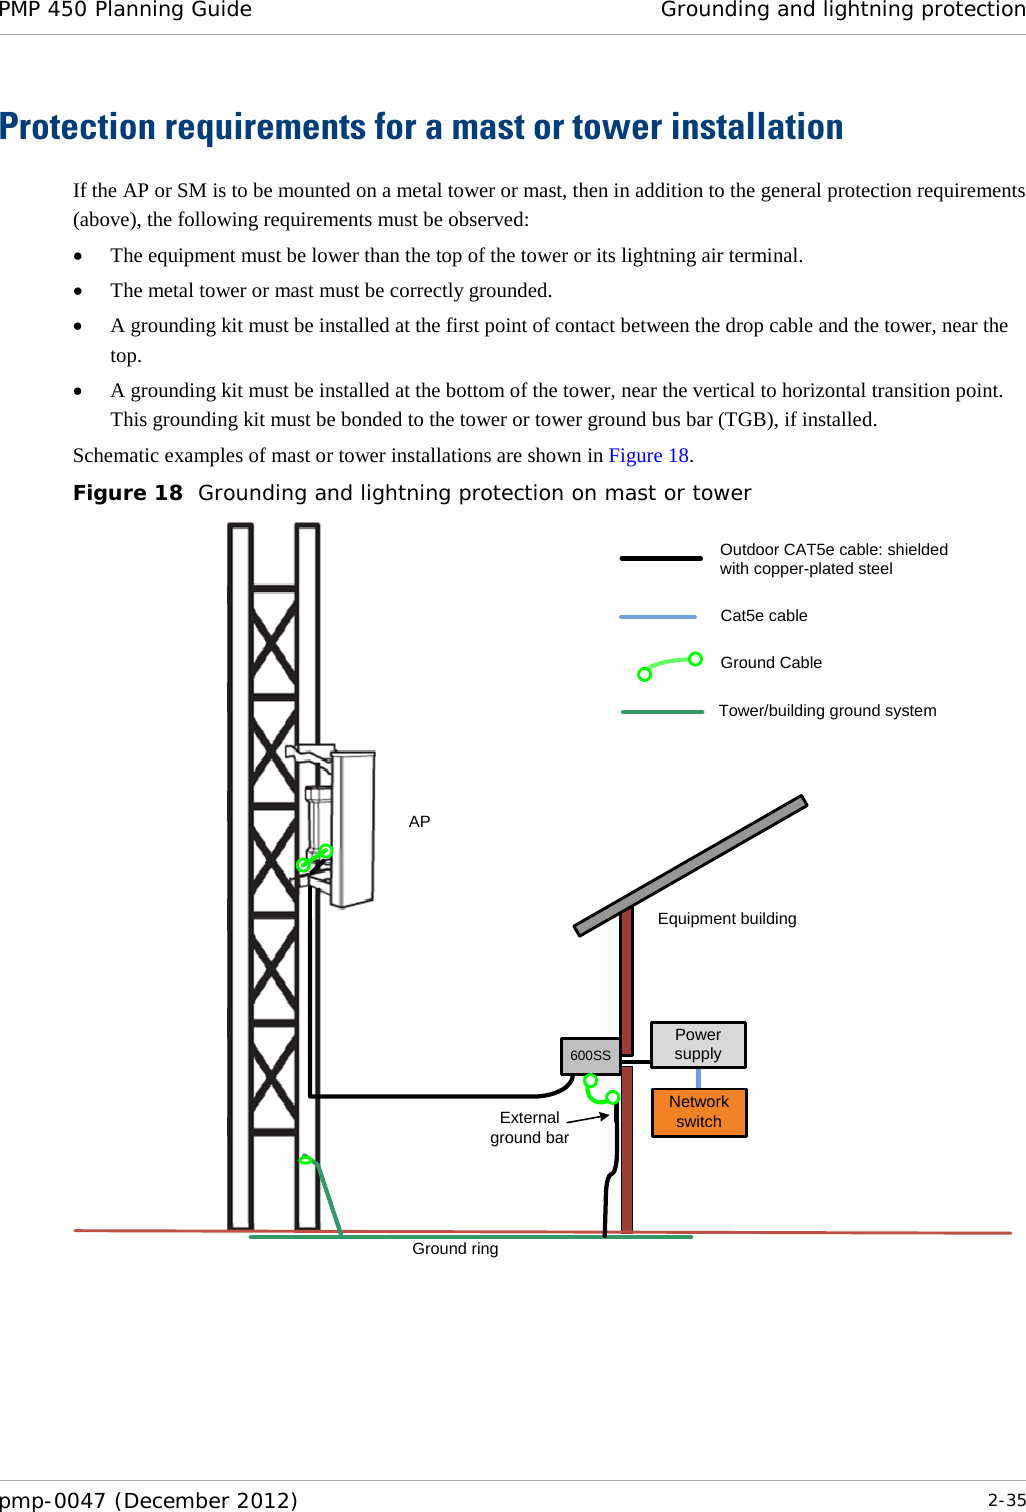 PMP 450 Planning Guide Grounding and lightning protection  pmp-0047 (December 2012)  2-35  Protection requirements for a mast or tower installation If the AP or SM is to be mounted on a metal tower or mast, then in addition to the general protection requirements (above), the following requirements must be observed: • The equipment must be lower than the top of the tower or its lightning air terminal. • The metal tower or mast must be correctly grounded. • A grounding kit must be installed at the first point of contact between the drop cable and the tower, near the top. • A grounding kit must be installed at the bottom of the tower, near the vertical to horizontal transition point. This grounding kit must be bonded to the tower or tower ground bus bar (TGB), if installed. Schematic examples of mast or tower installations are shown in Figure 18. Figure 18  Grounding and lightning protection on mast or tower 600SSExternal ground barGround ringOutdoor CAT5e cable: shielded with copper-plated steelPower supplyEquipment buildingNetwork switchAPGround CableTower/building ground systemCat5e cable 